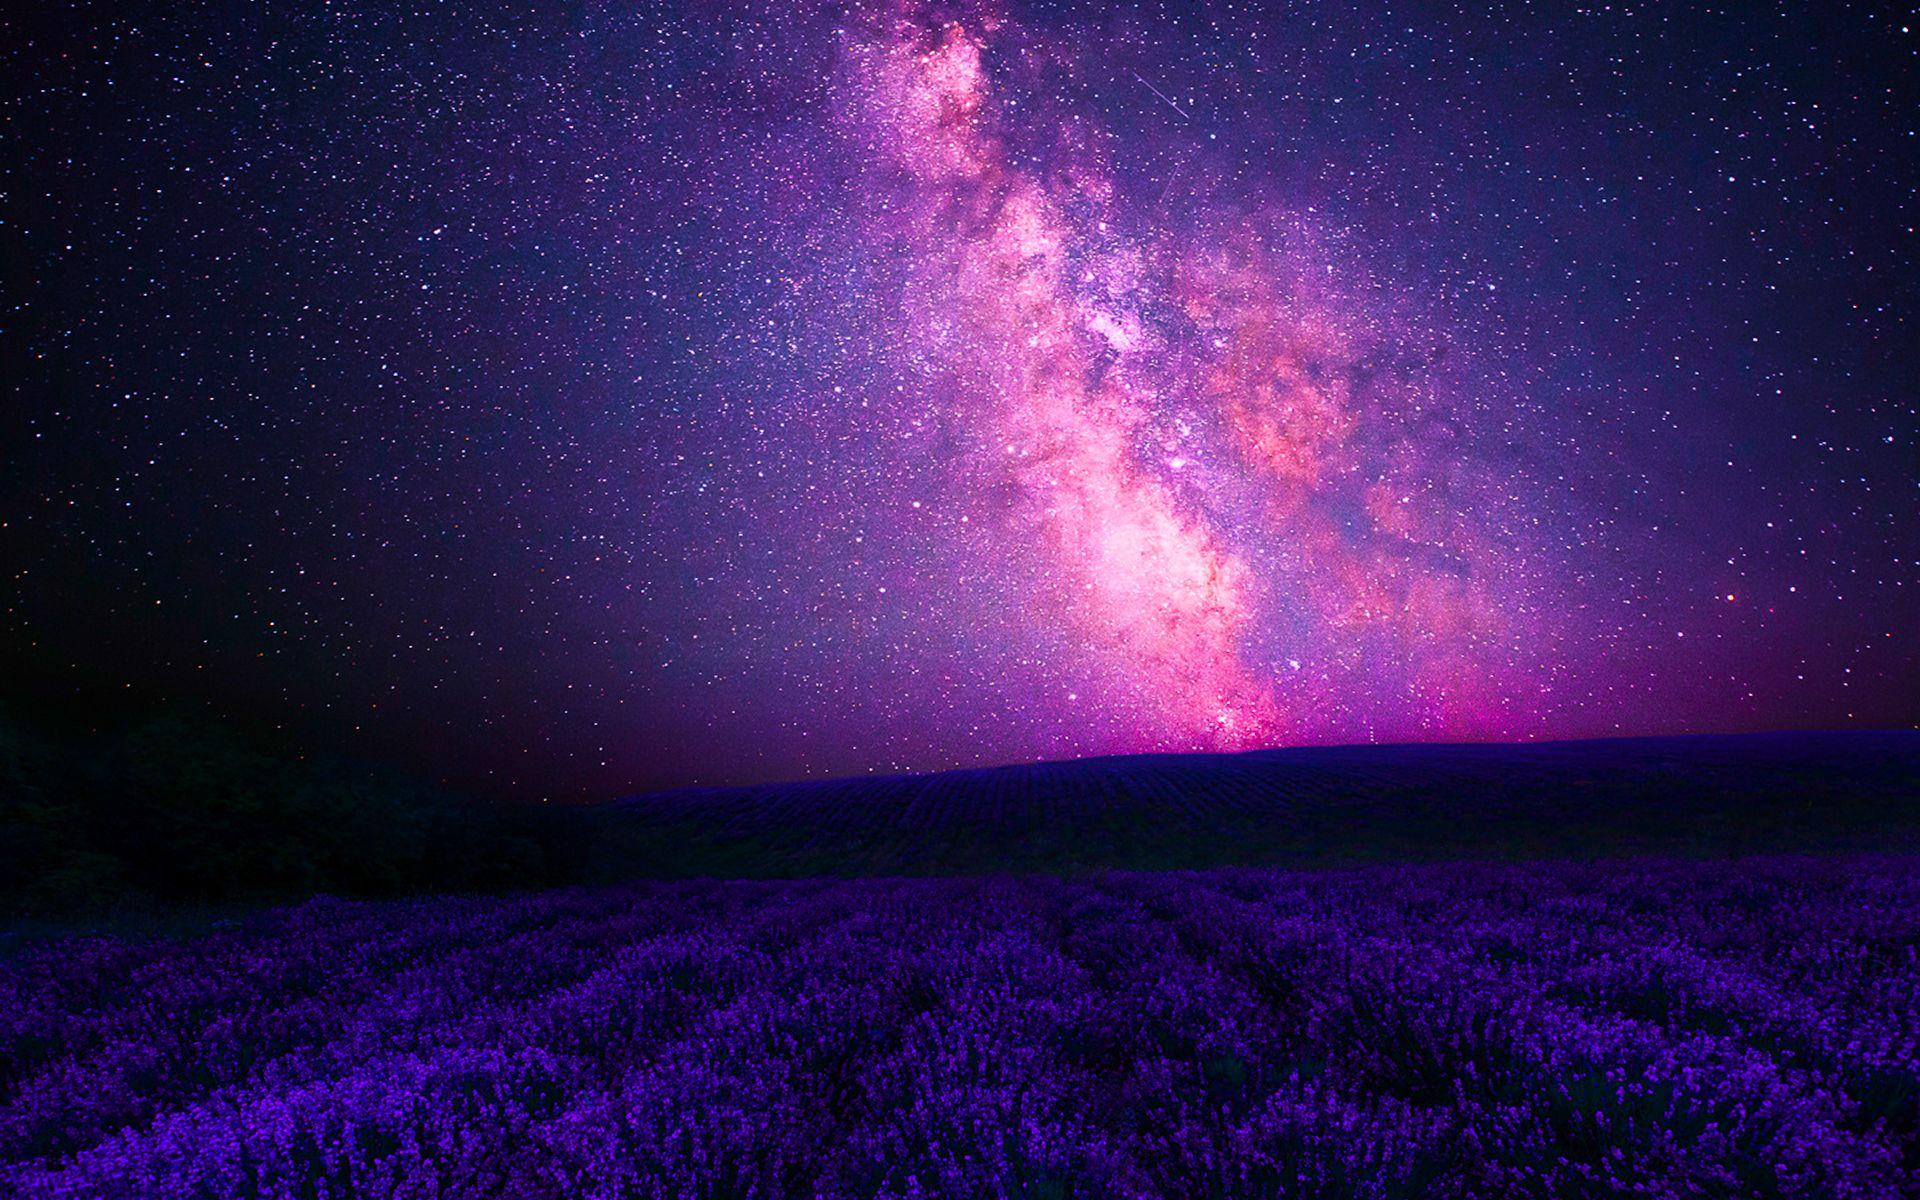 Pink Galaxy over Lavender Field Full HD Wallpaper and Background